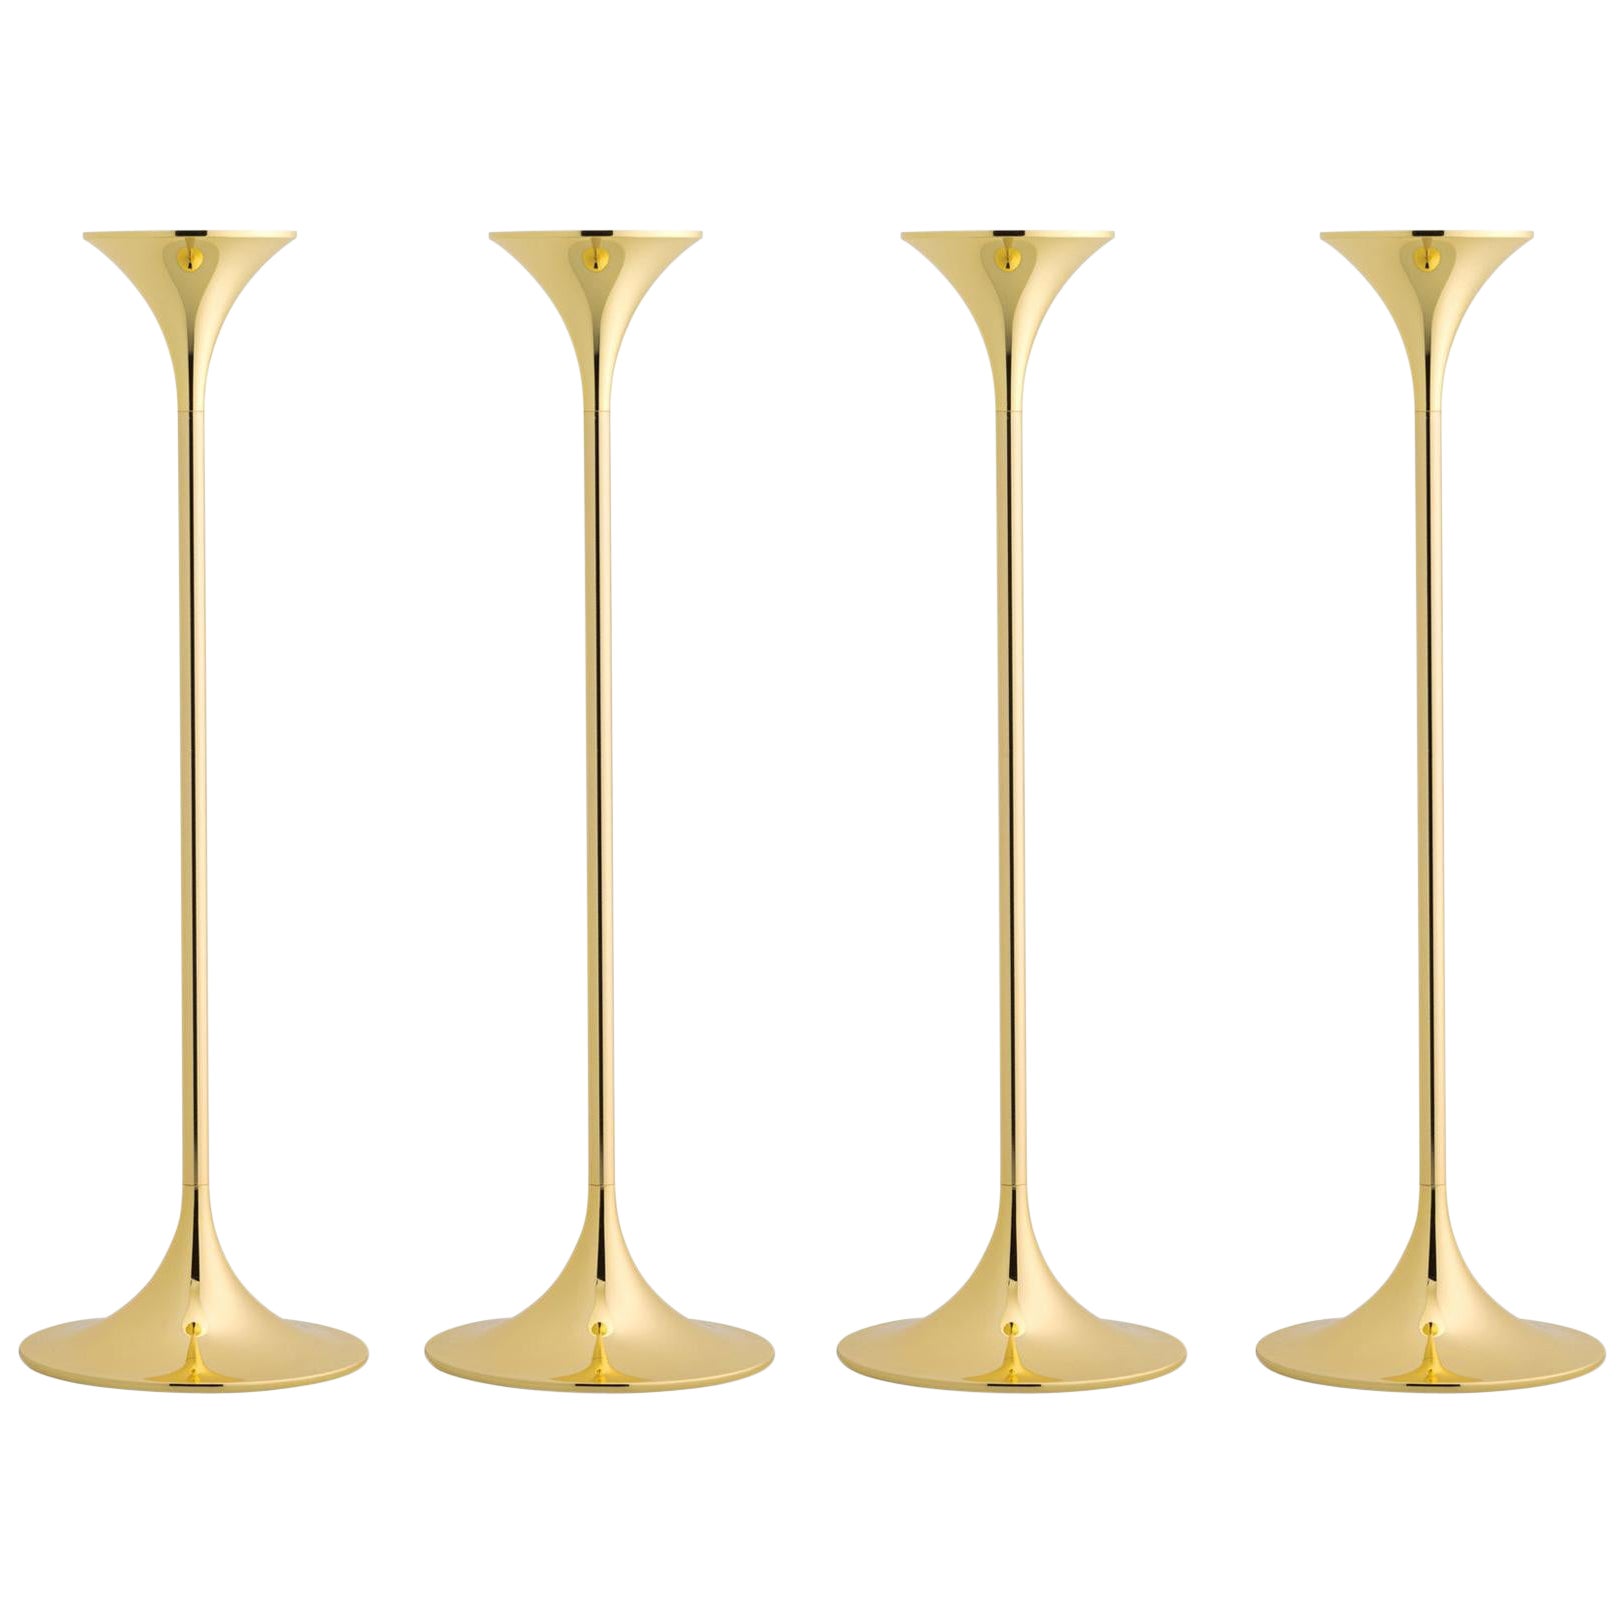 Set of Four Max Brüel 'Jazz' Candleholders, Steel with Brass Plating by Karakter For Sale